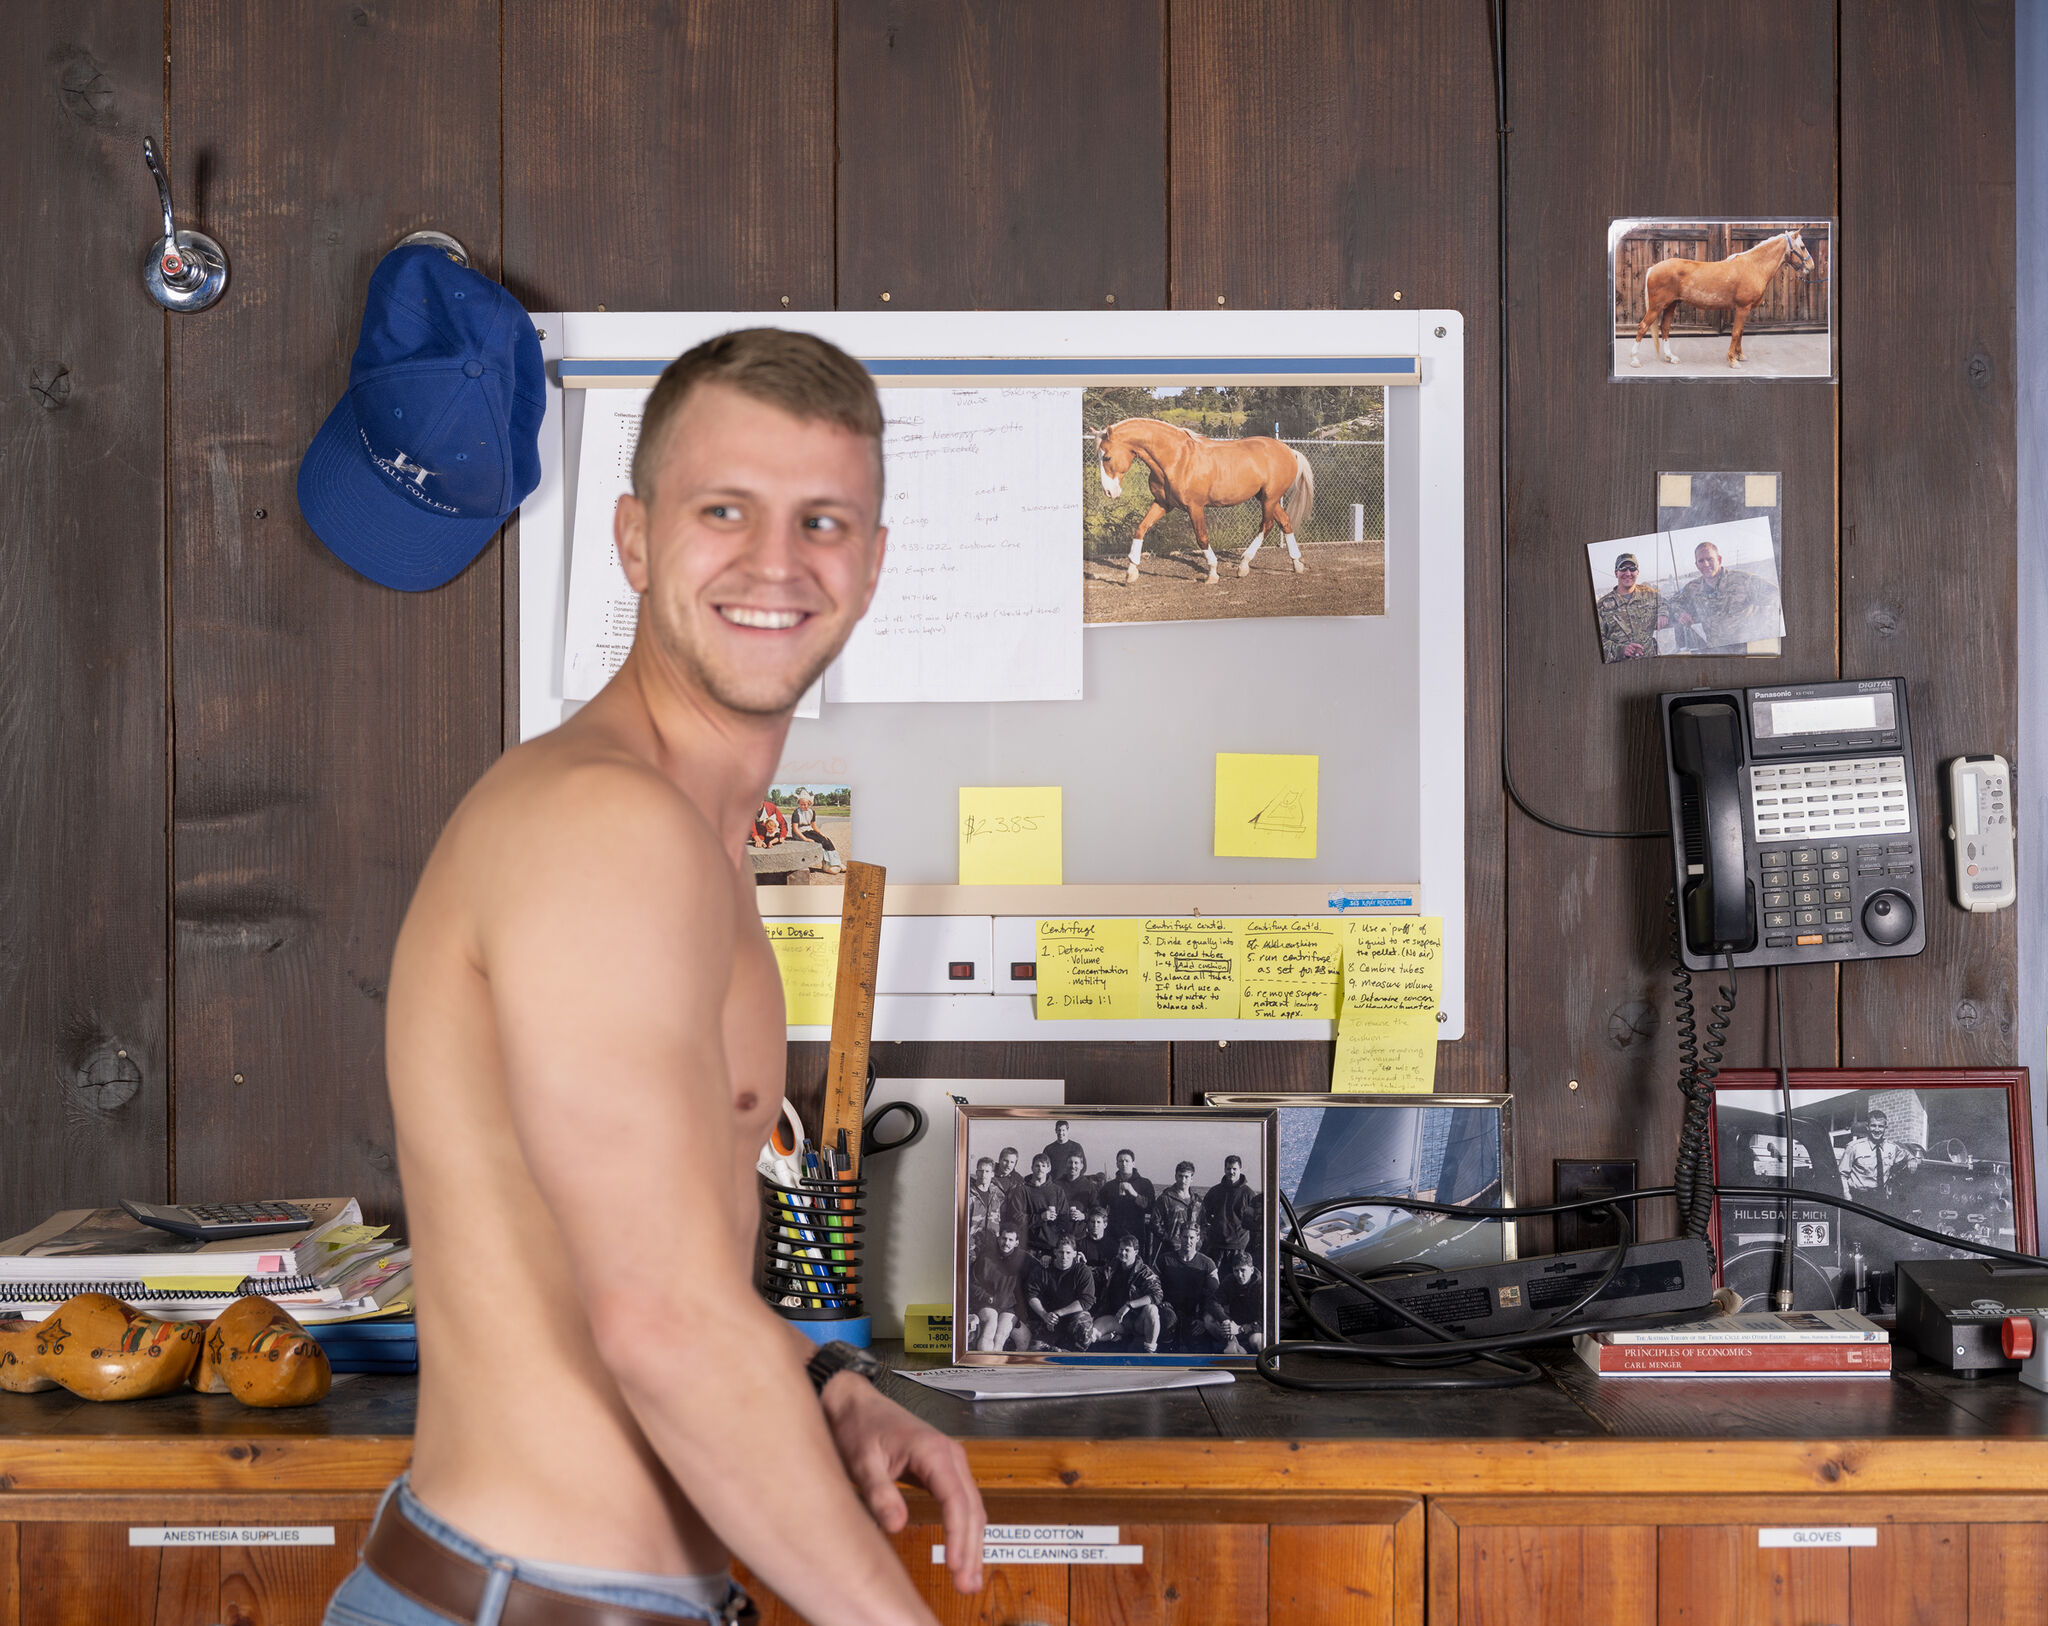 A smiling, shirtless, blonde man glances sideways out of the frame while standing in front of a wood-paneled office space that is cluttered with a bulletin board, pinned and framed photographs, a wall-mounted phone, sticky notes, and various office supplies.